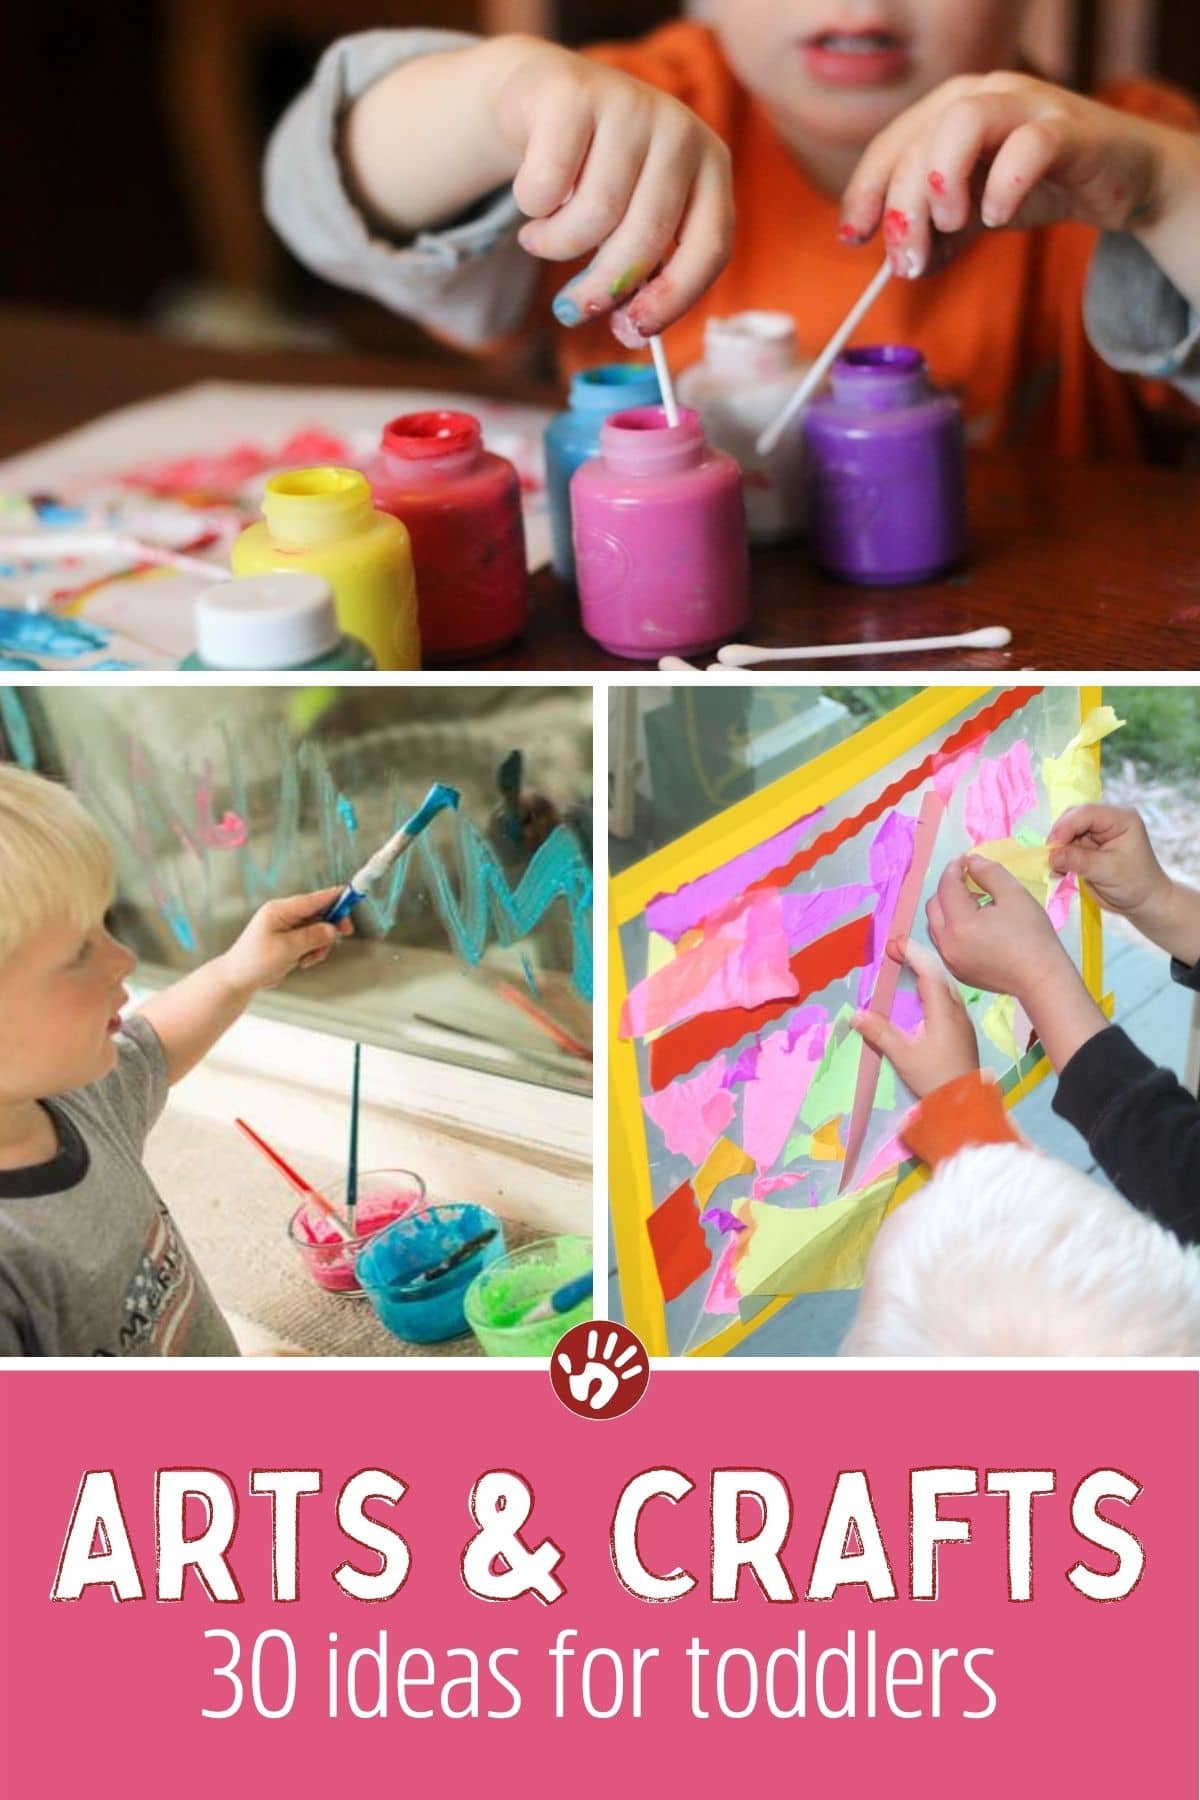 Paint sticks art materials fun and easy for children and toddlers